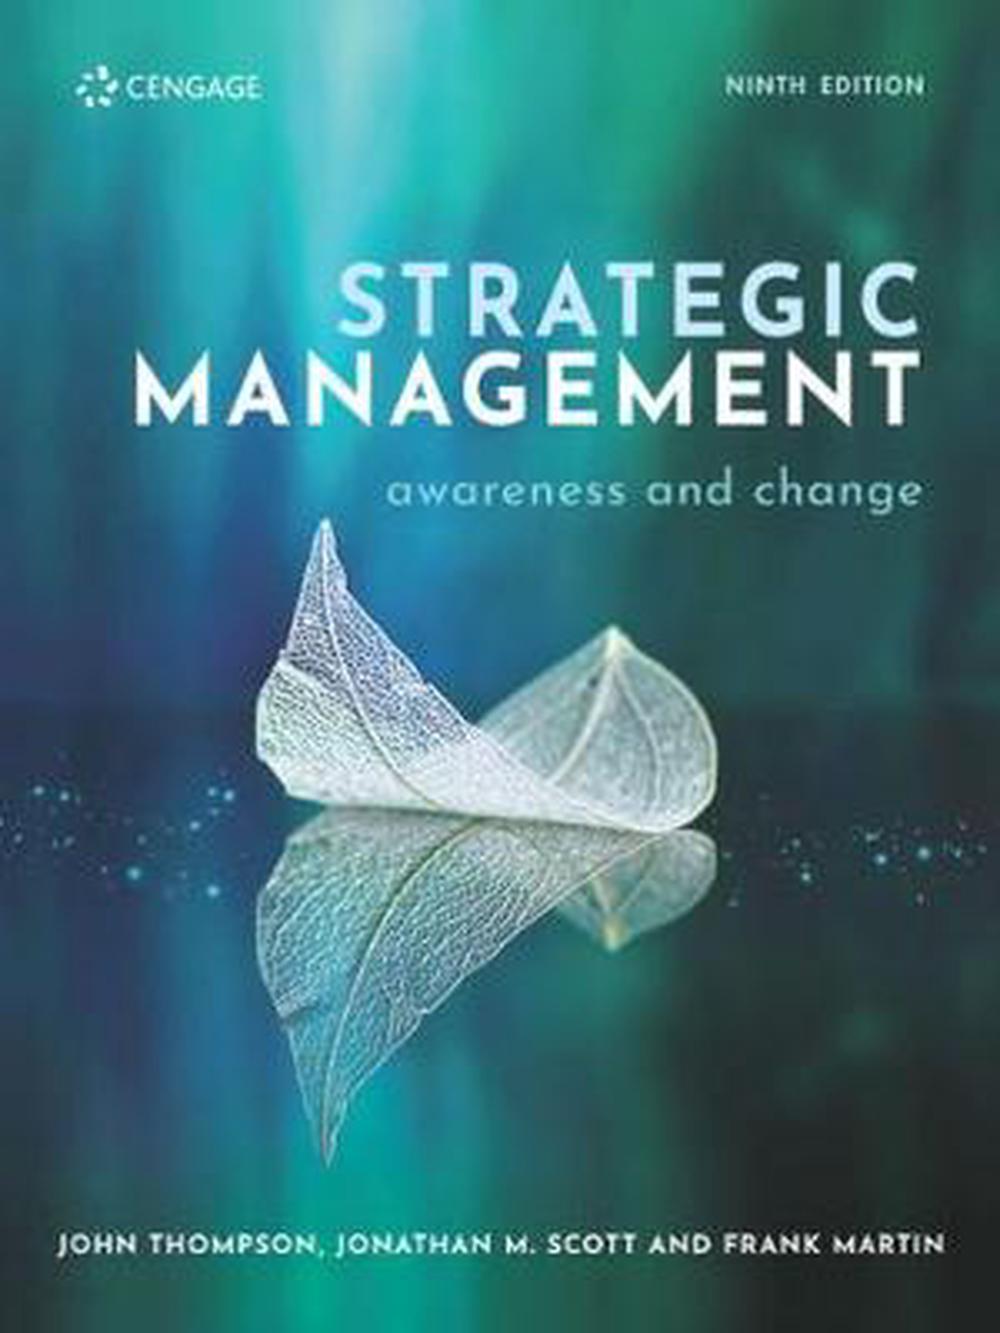 Strategic Management Awareness and Change, 9th Edition by John Thompson